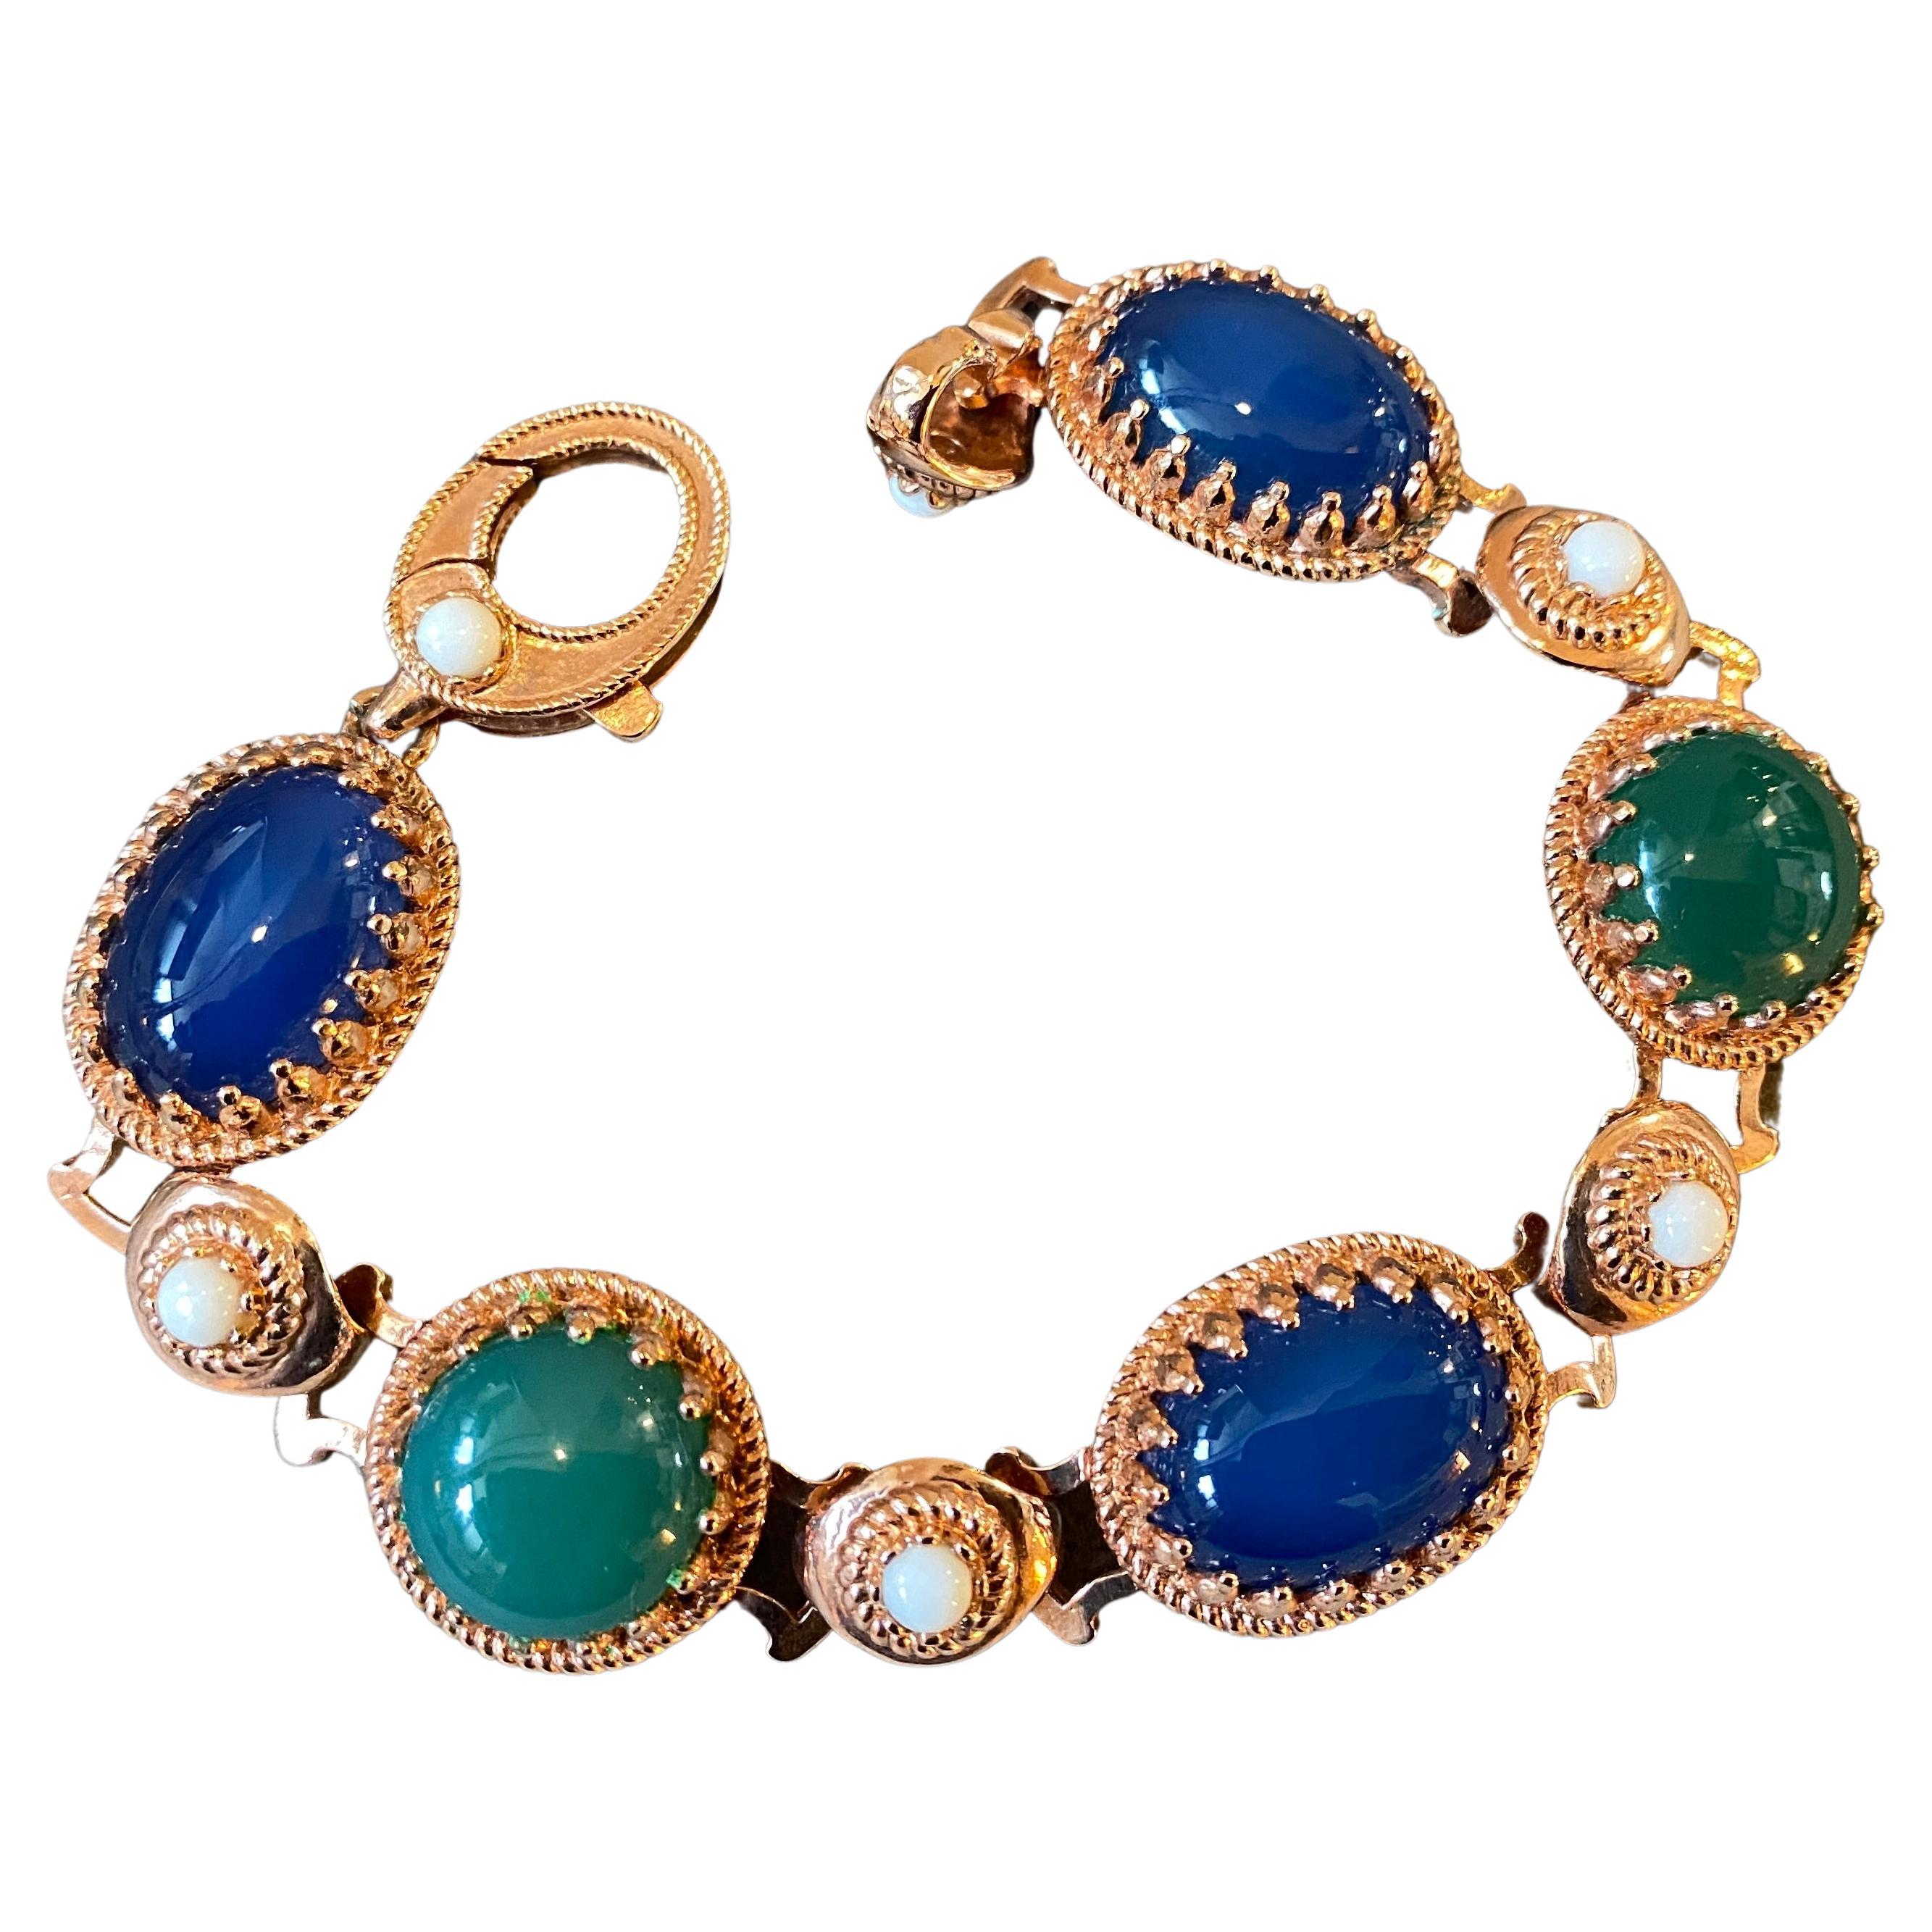 1990s Green and Blue Agate and Bronze Italian Bracelet by Anomis